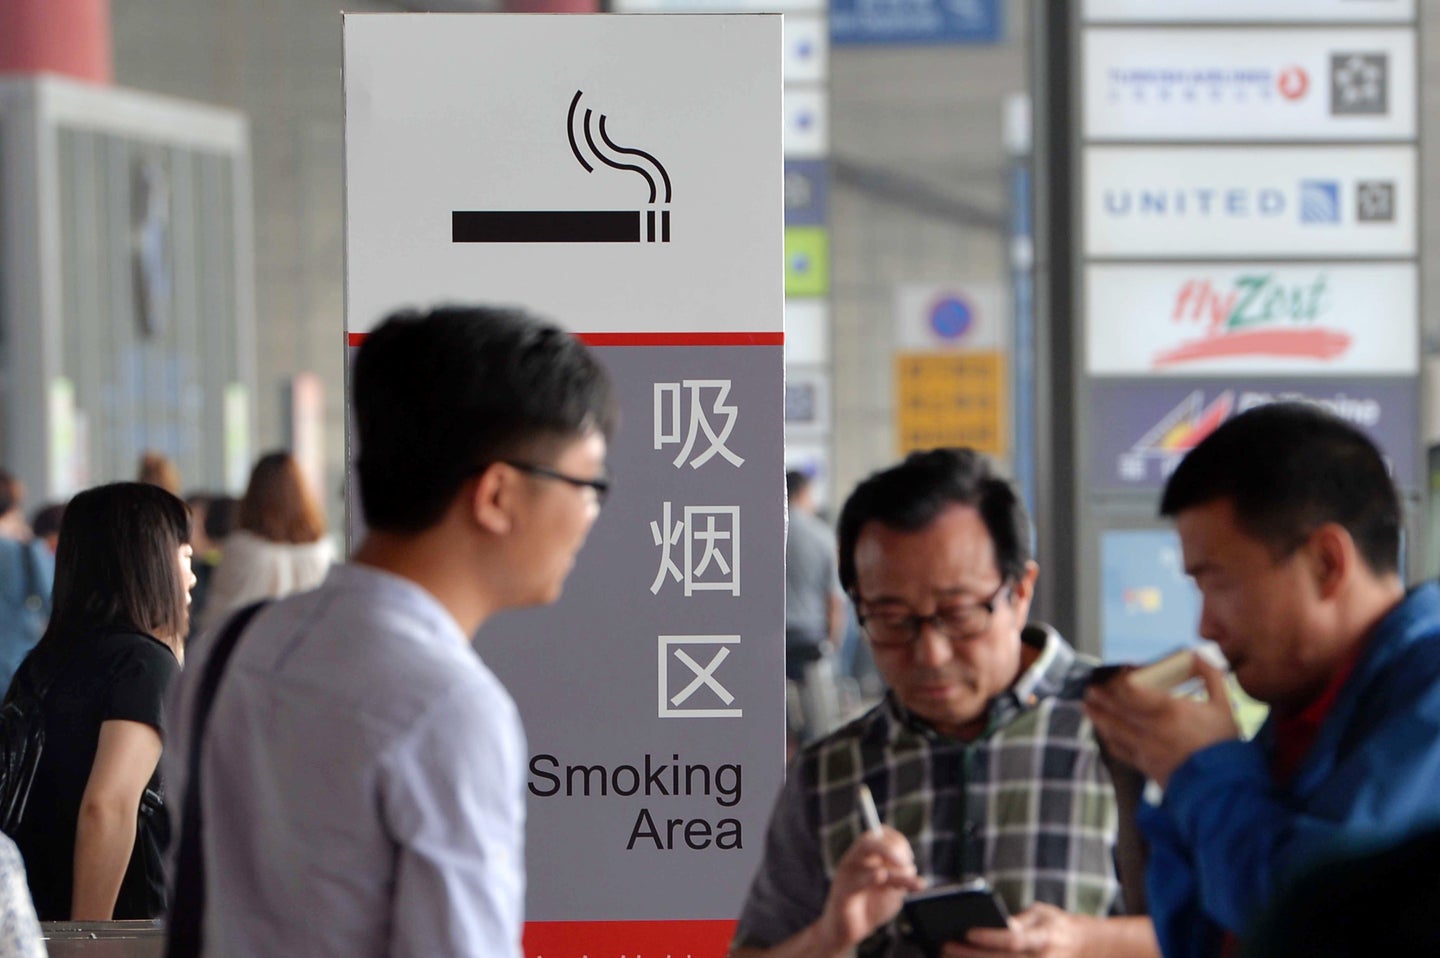 Can China stub smokers' butts for a smoke-free law?